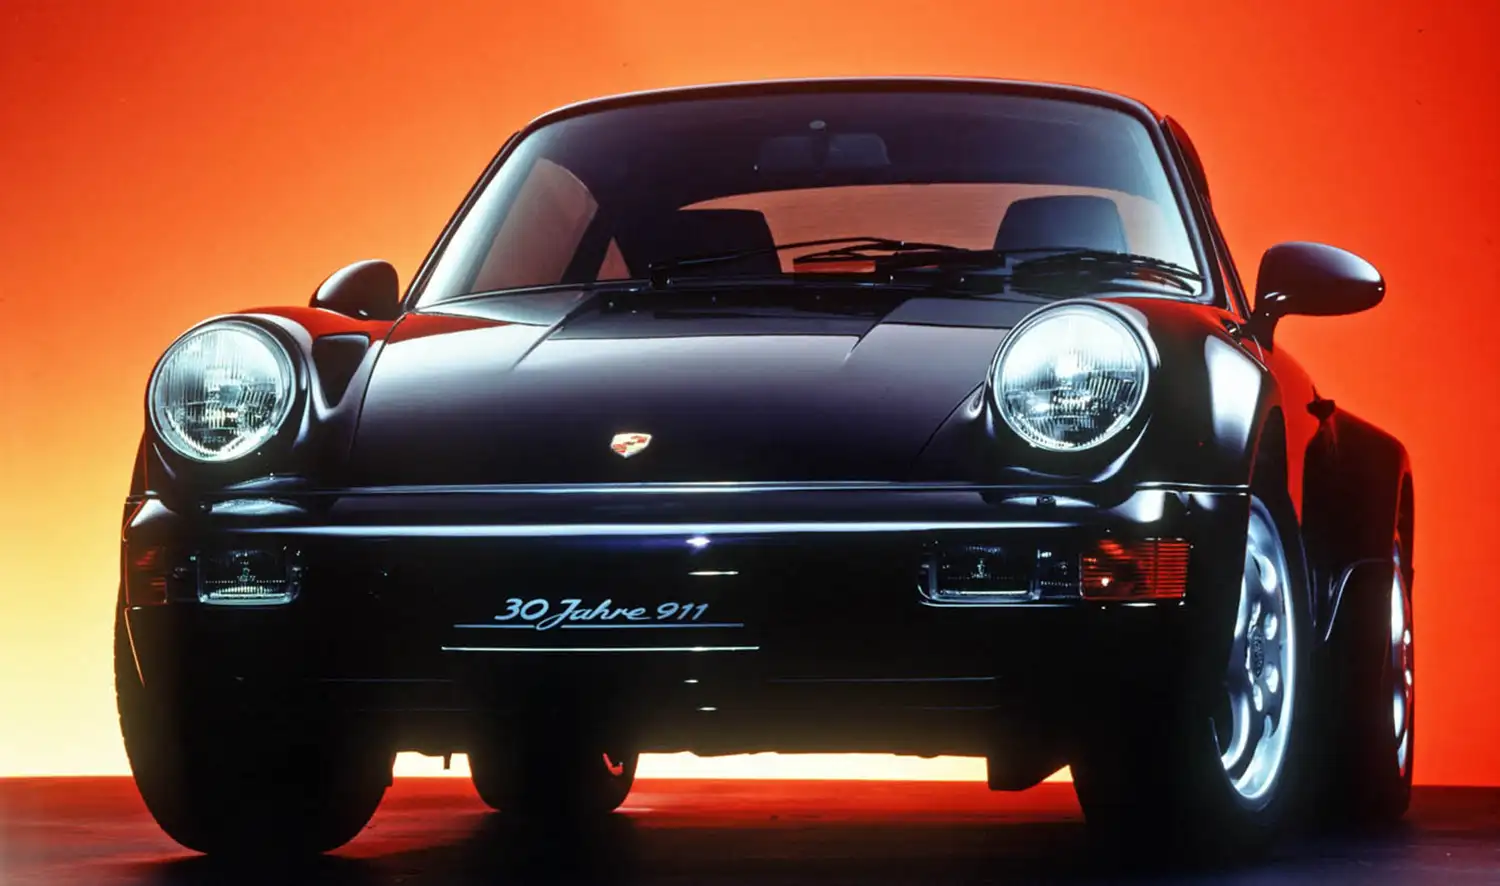 Turbo: The Iconic Name in the Porsche Family